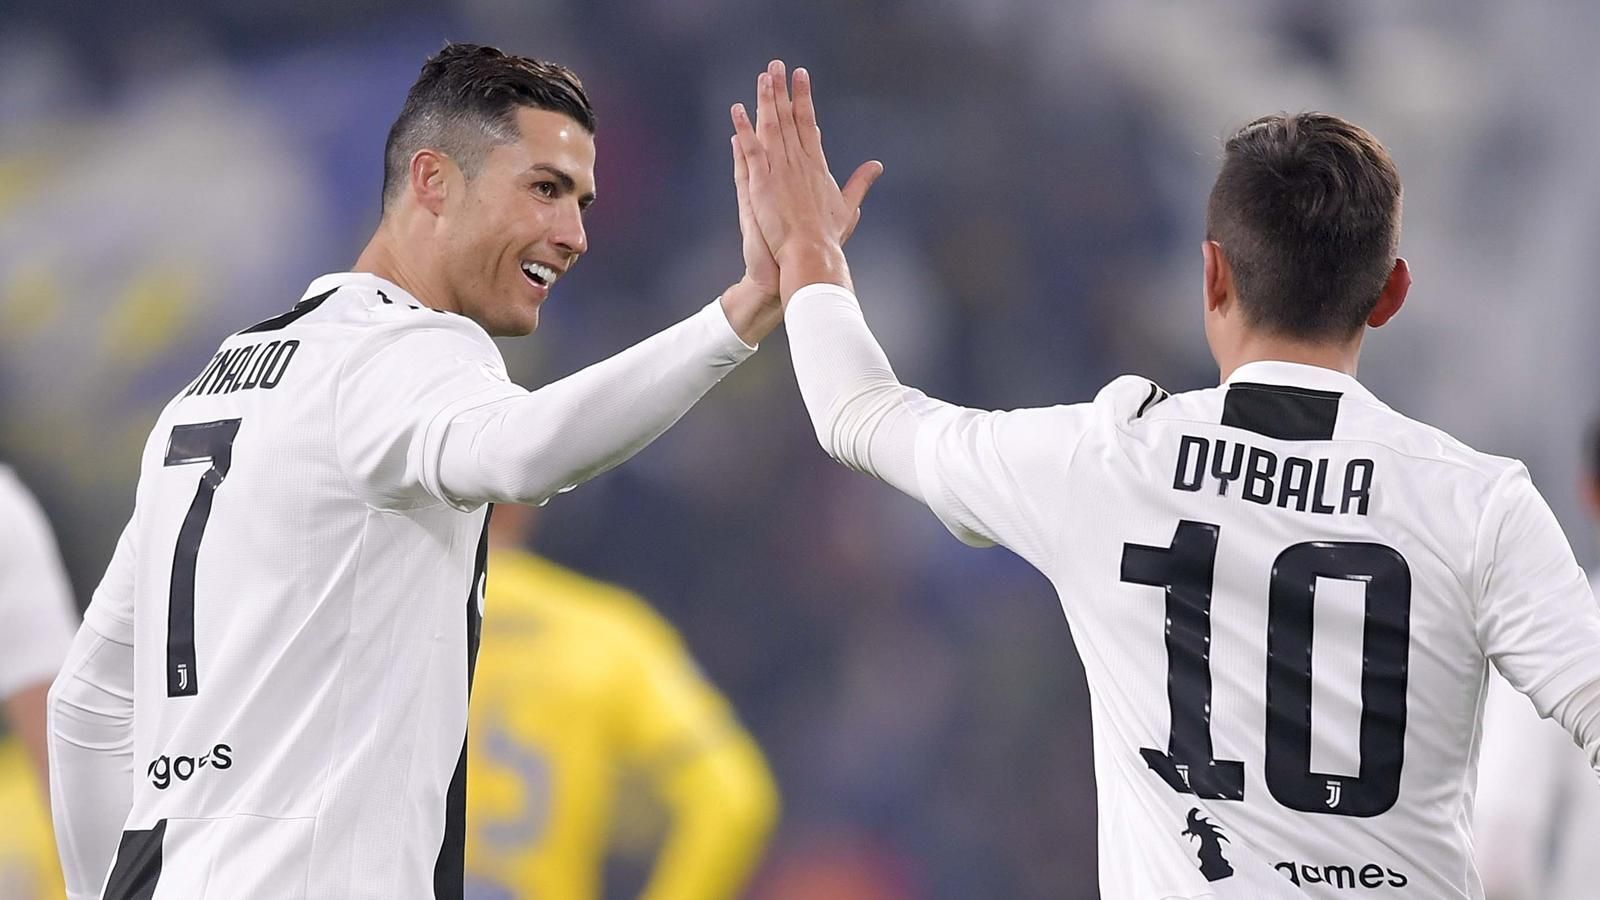 Sarri Believes Ronaldo and Dybala Can Evolve into a Strong Attacking Pair